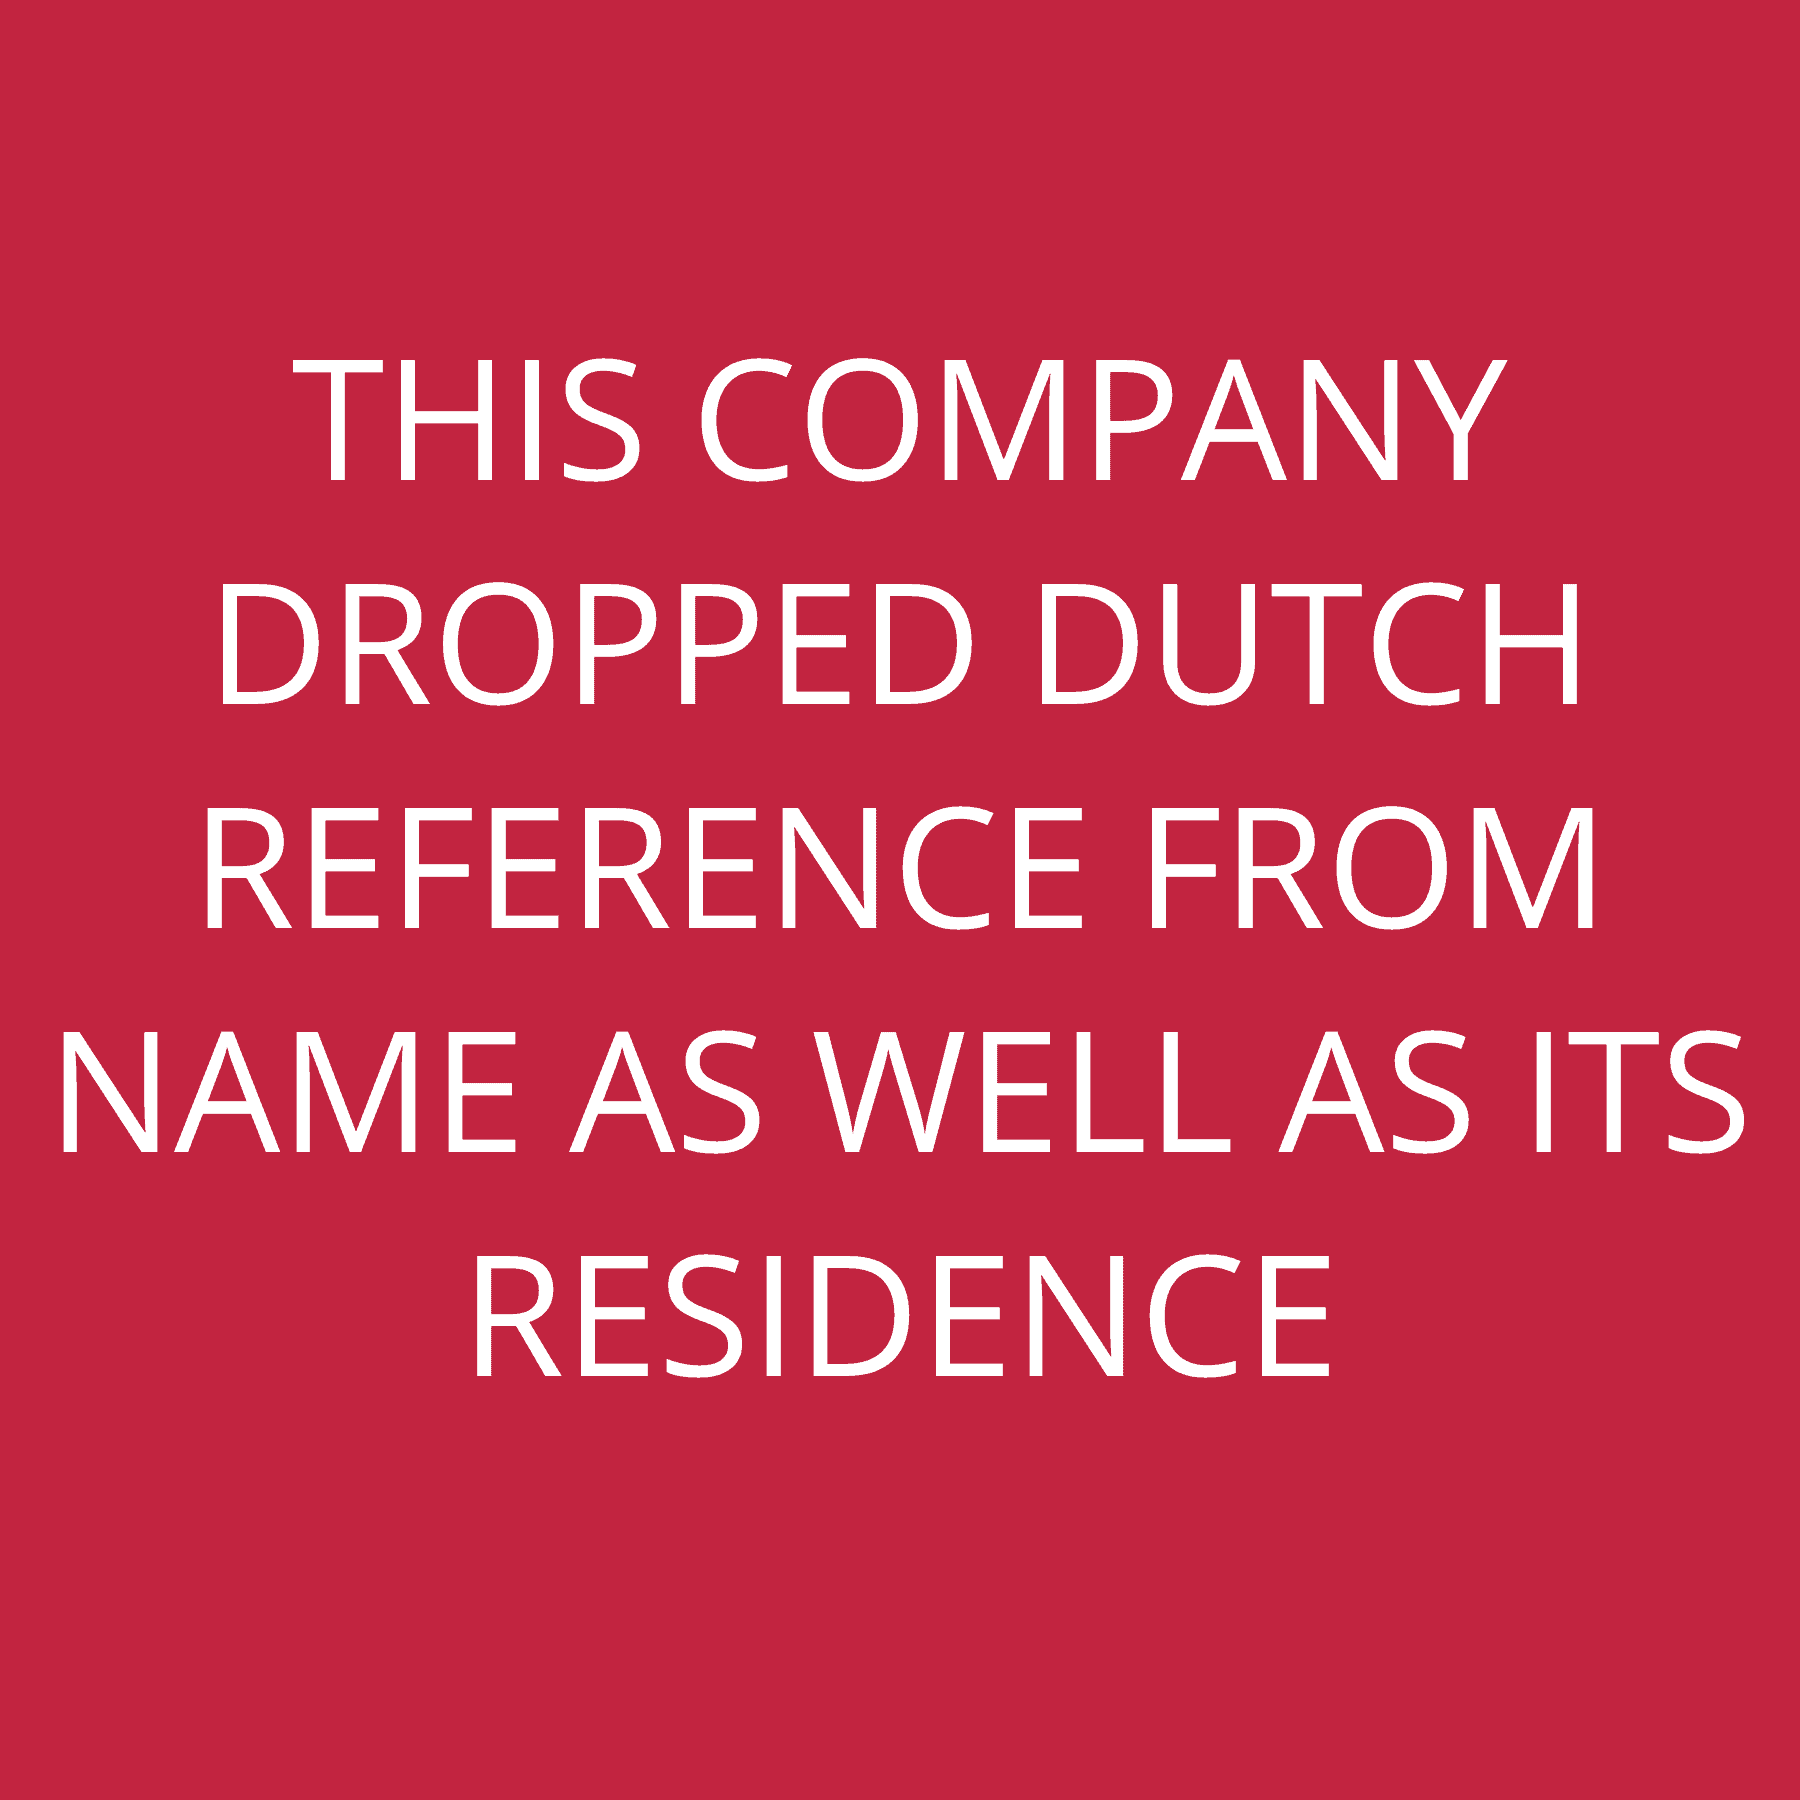 This company dropped Dutch reference from name as well as its residence